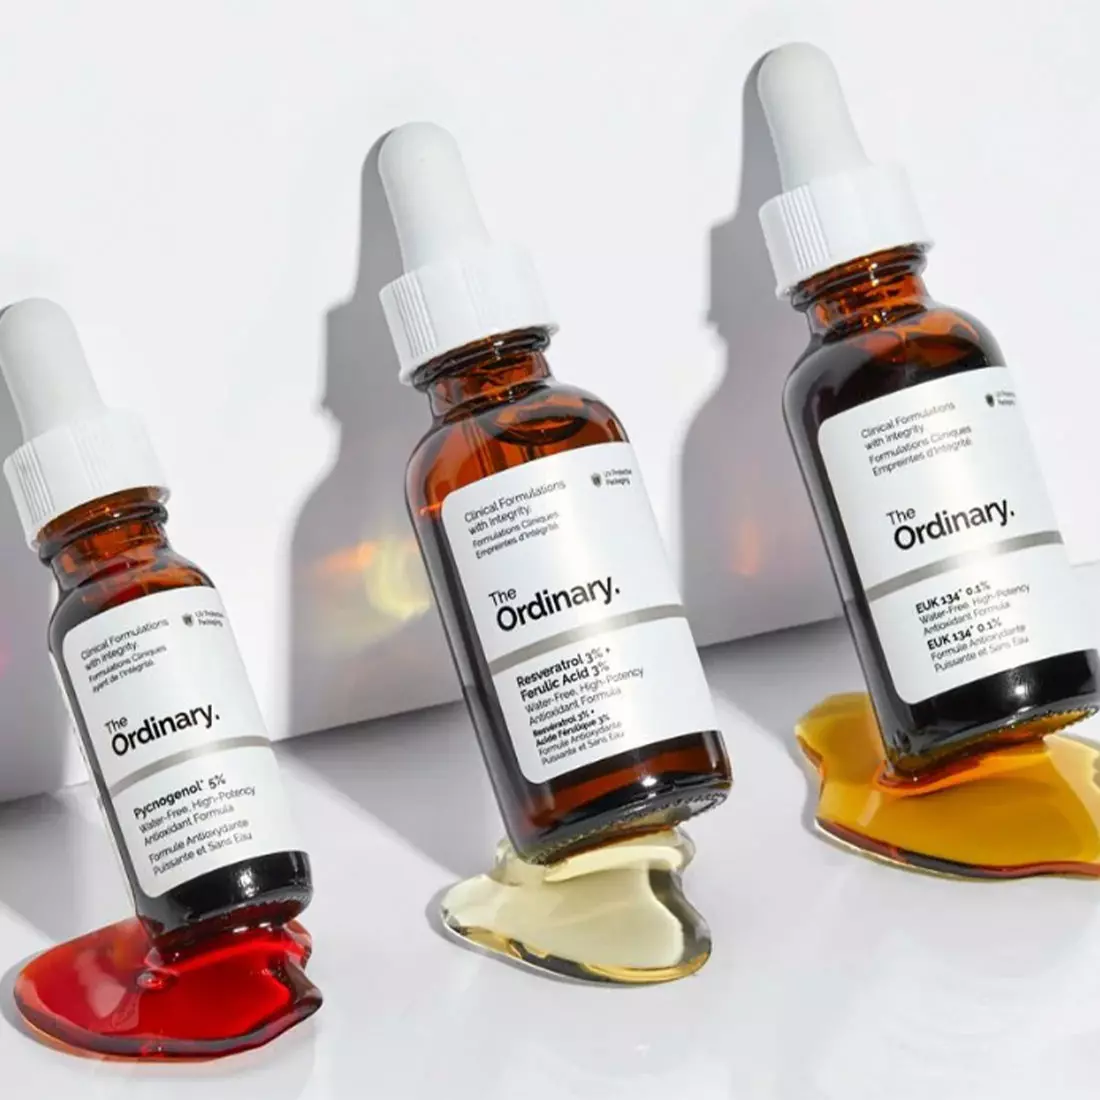 The Ordinary care – Quality products that suit you.